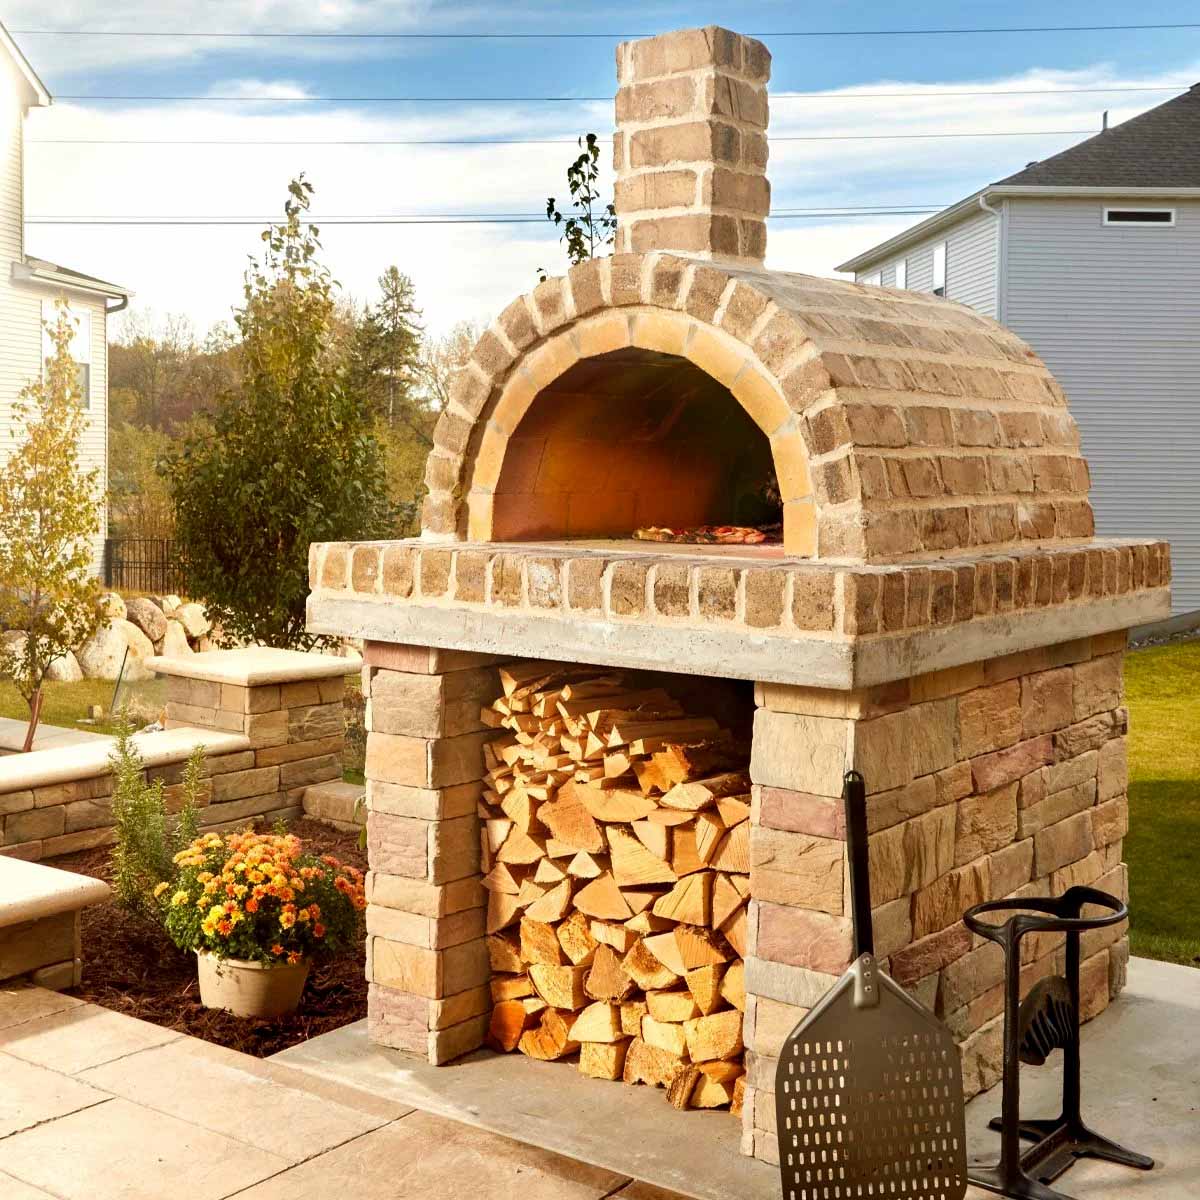 How To Build A Brick Outdoor Pizza Oven